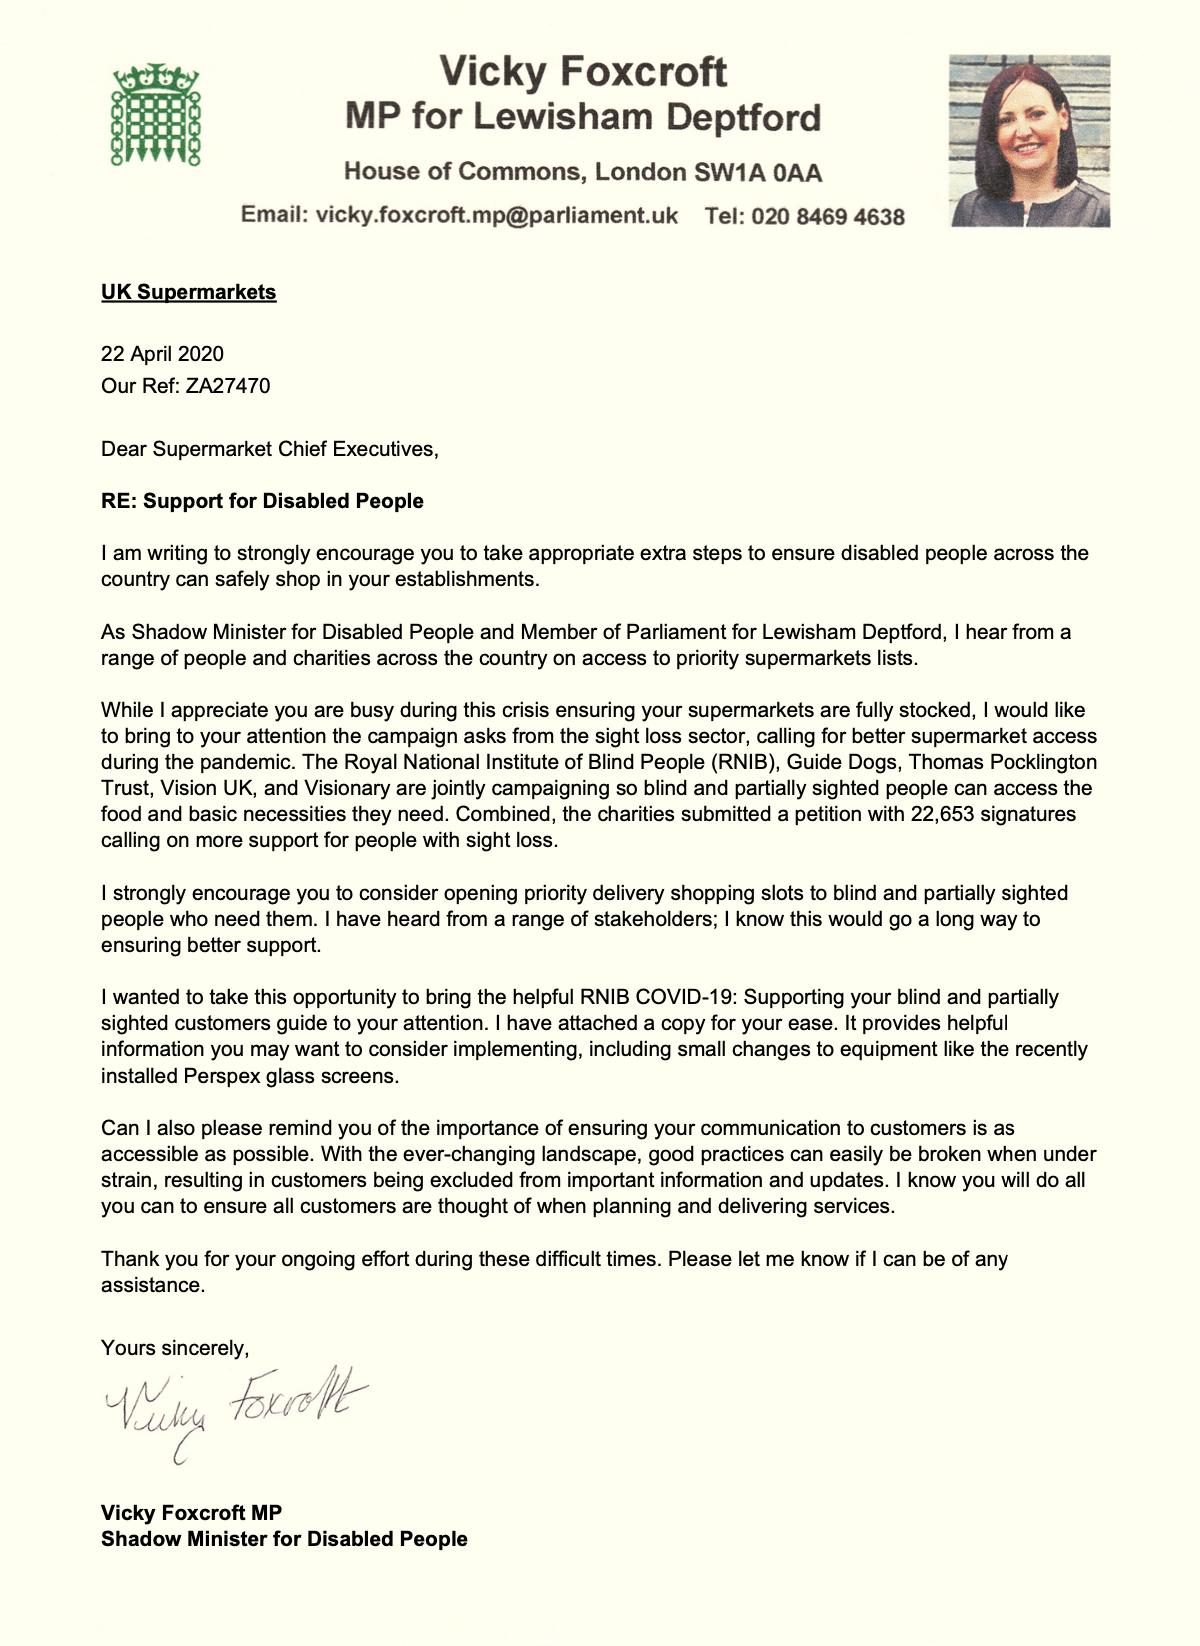 Image of Vicky Foxcroft’s letter to supermarkets, full text in article